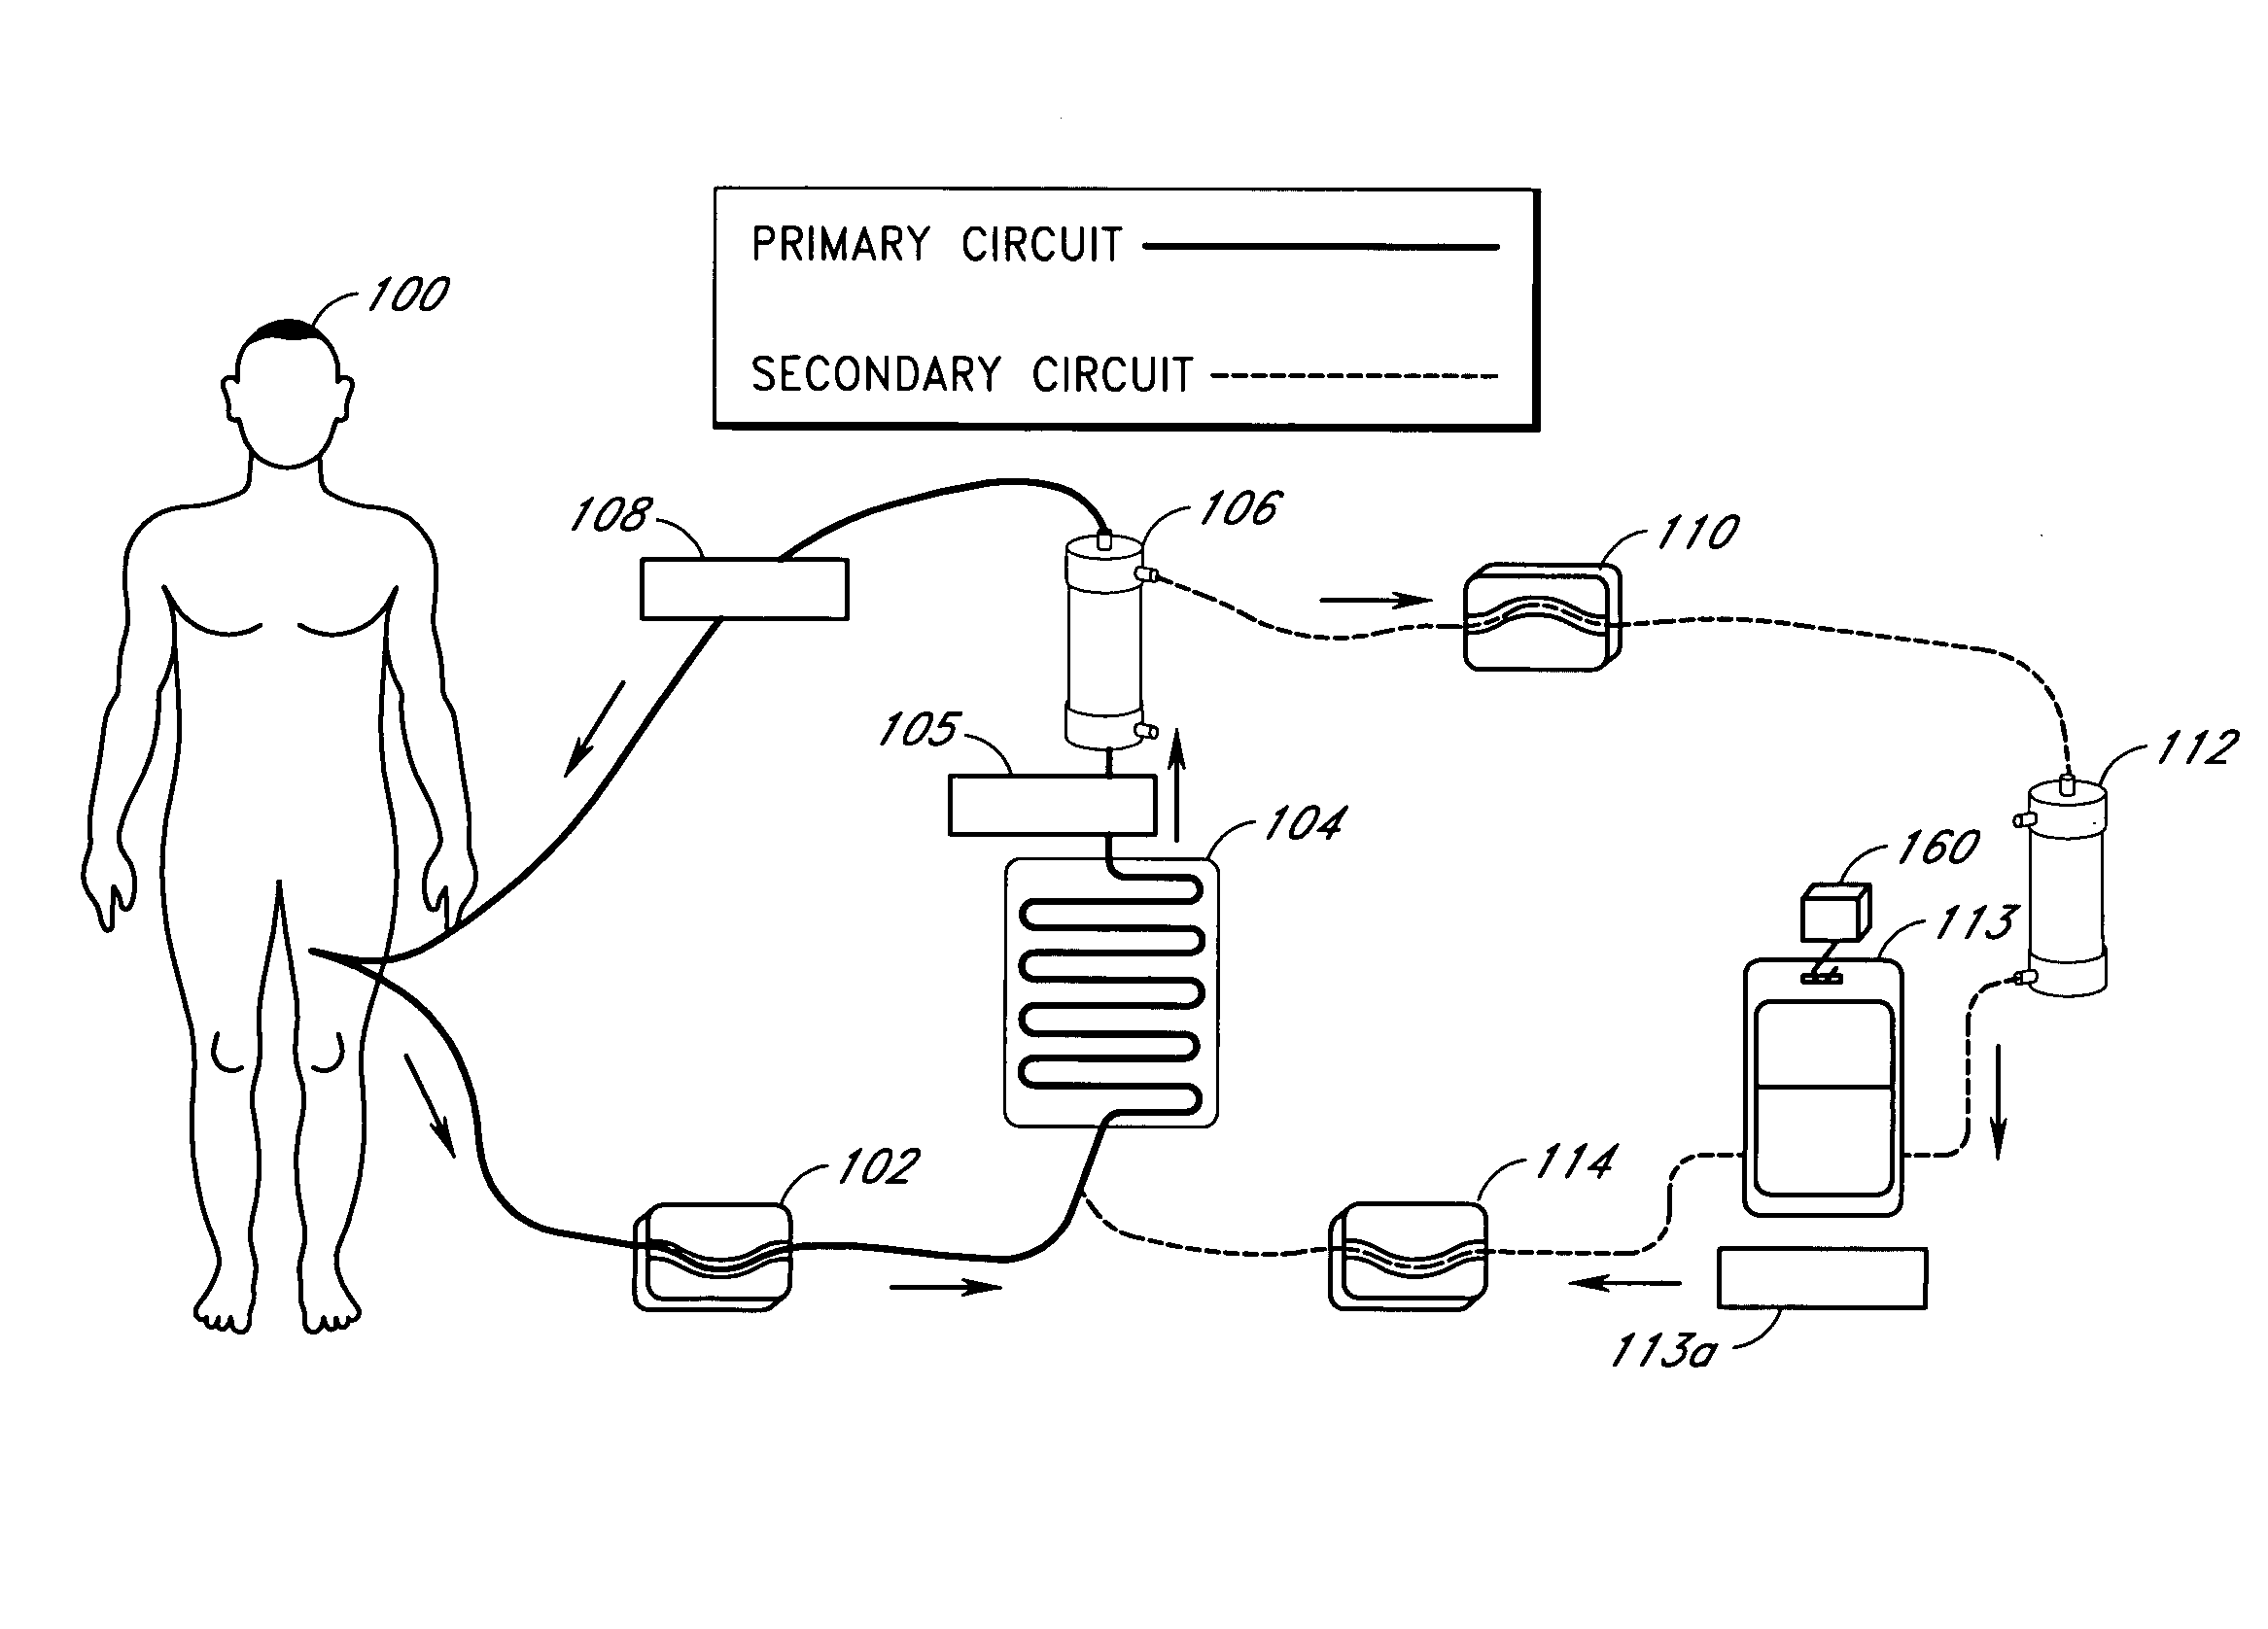 Irradiation and filter device for treatment of blood